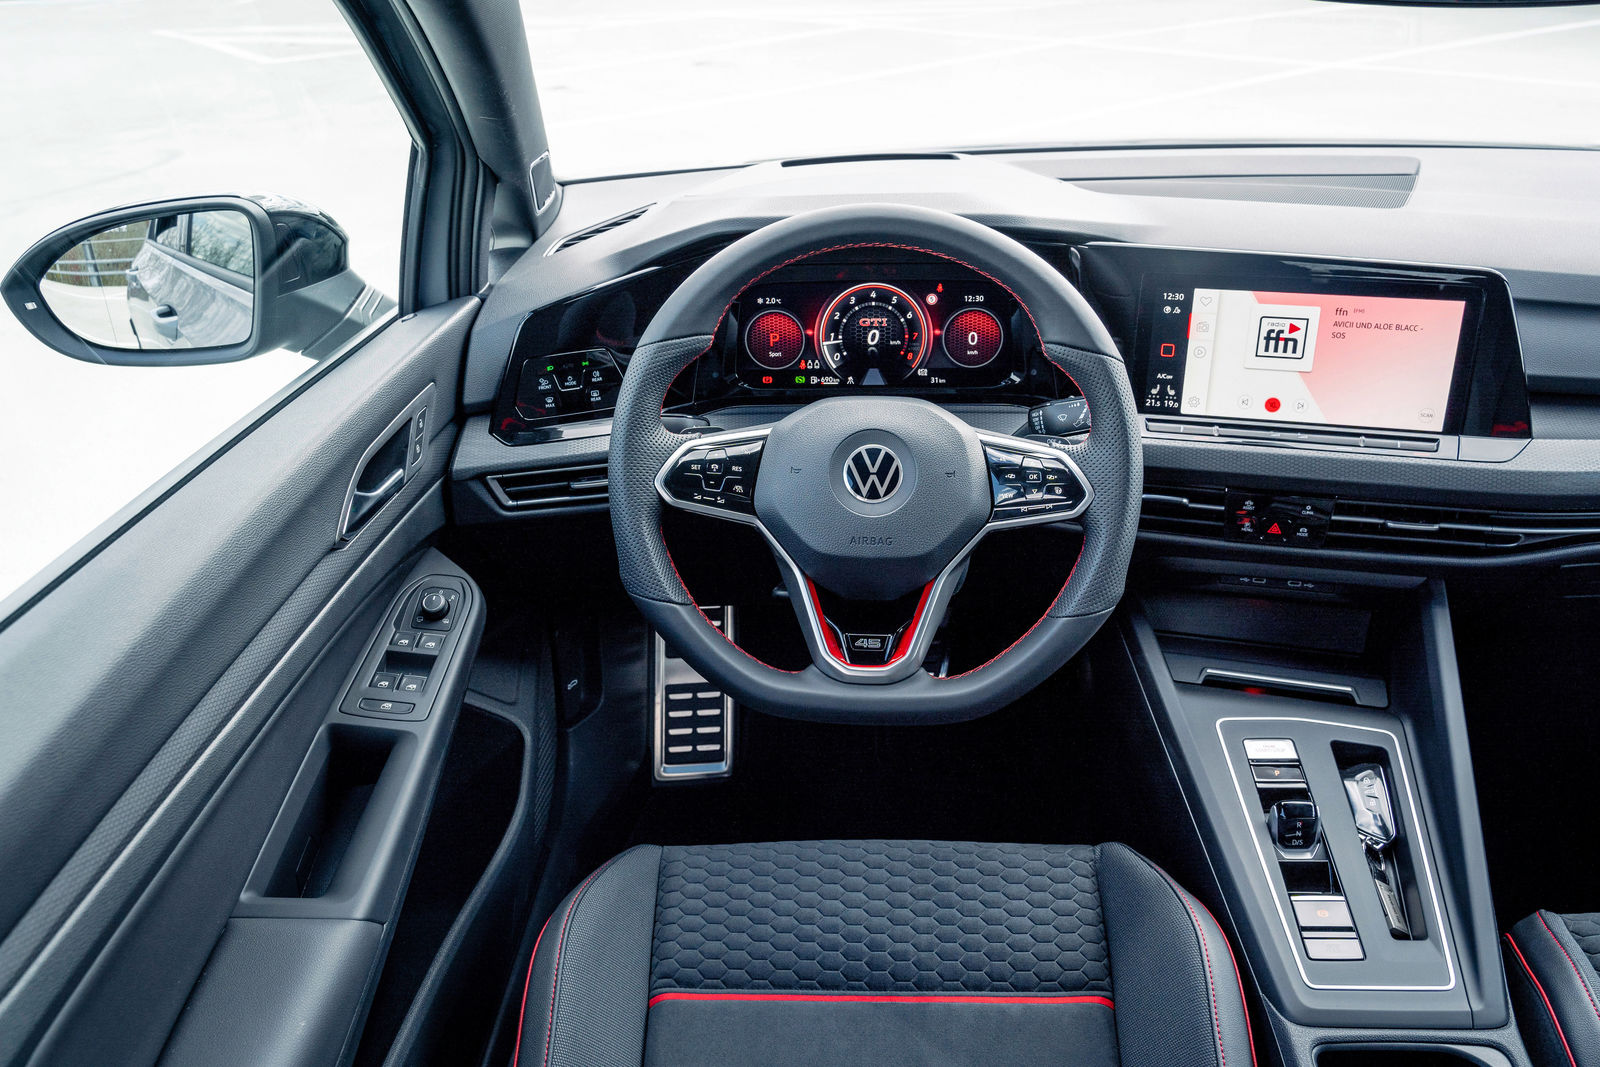 Story: “The Golf GTI Clubsport 45 is quite simply an incredibly good car!”